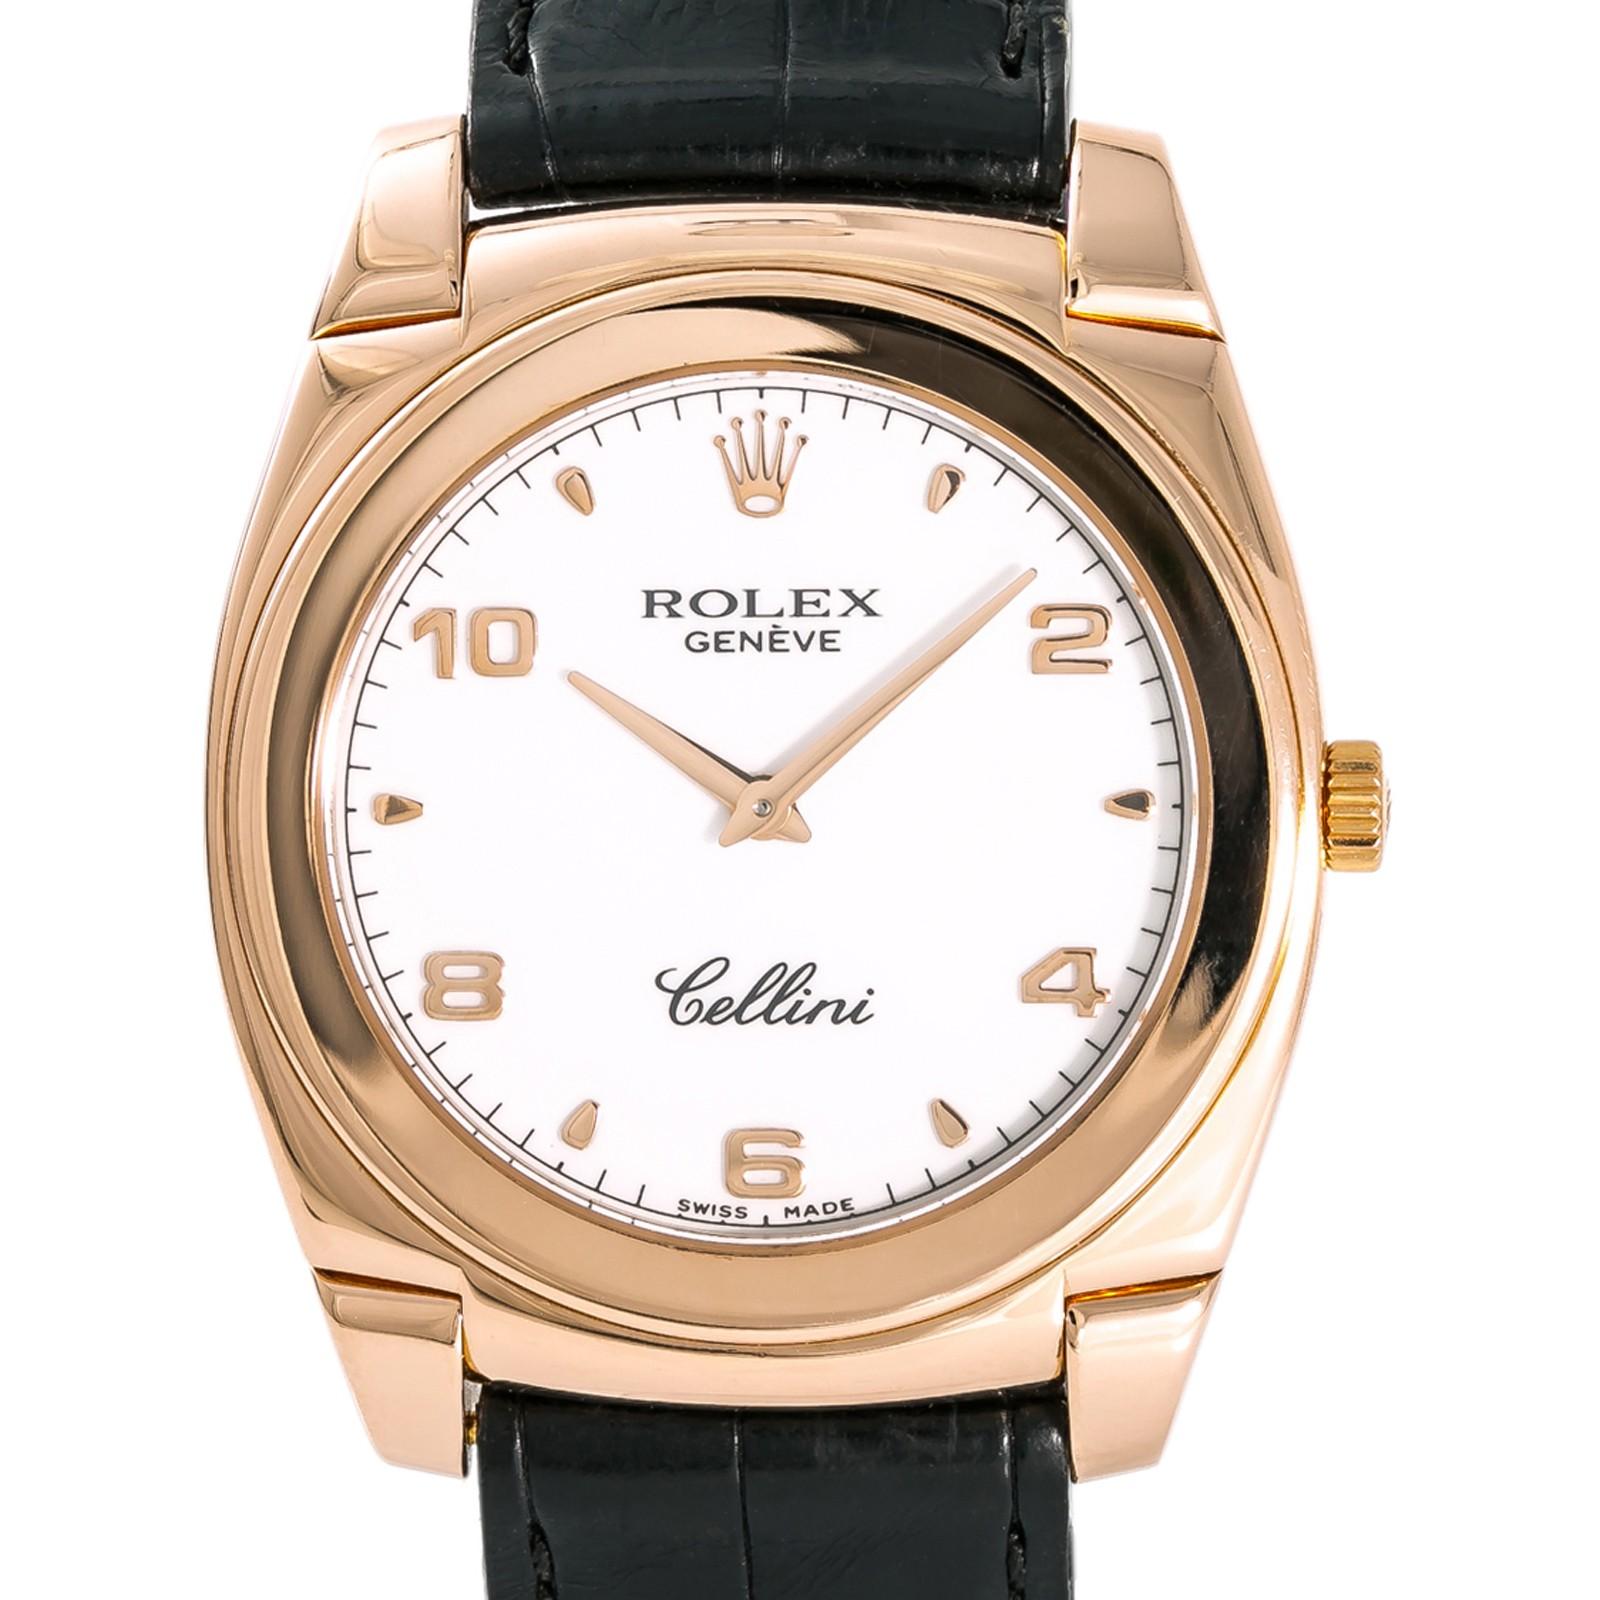 Women's Rolex Cellini 5330, White Dial Certified Authentic For Sale